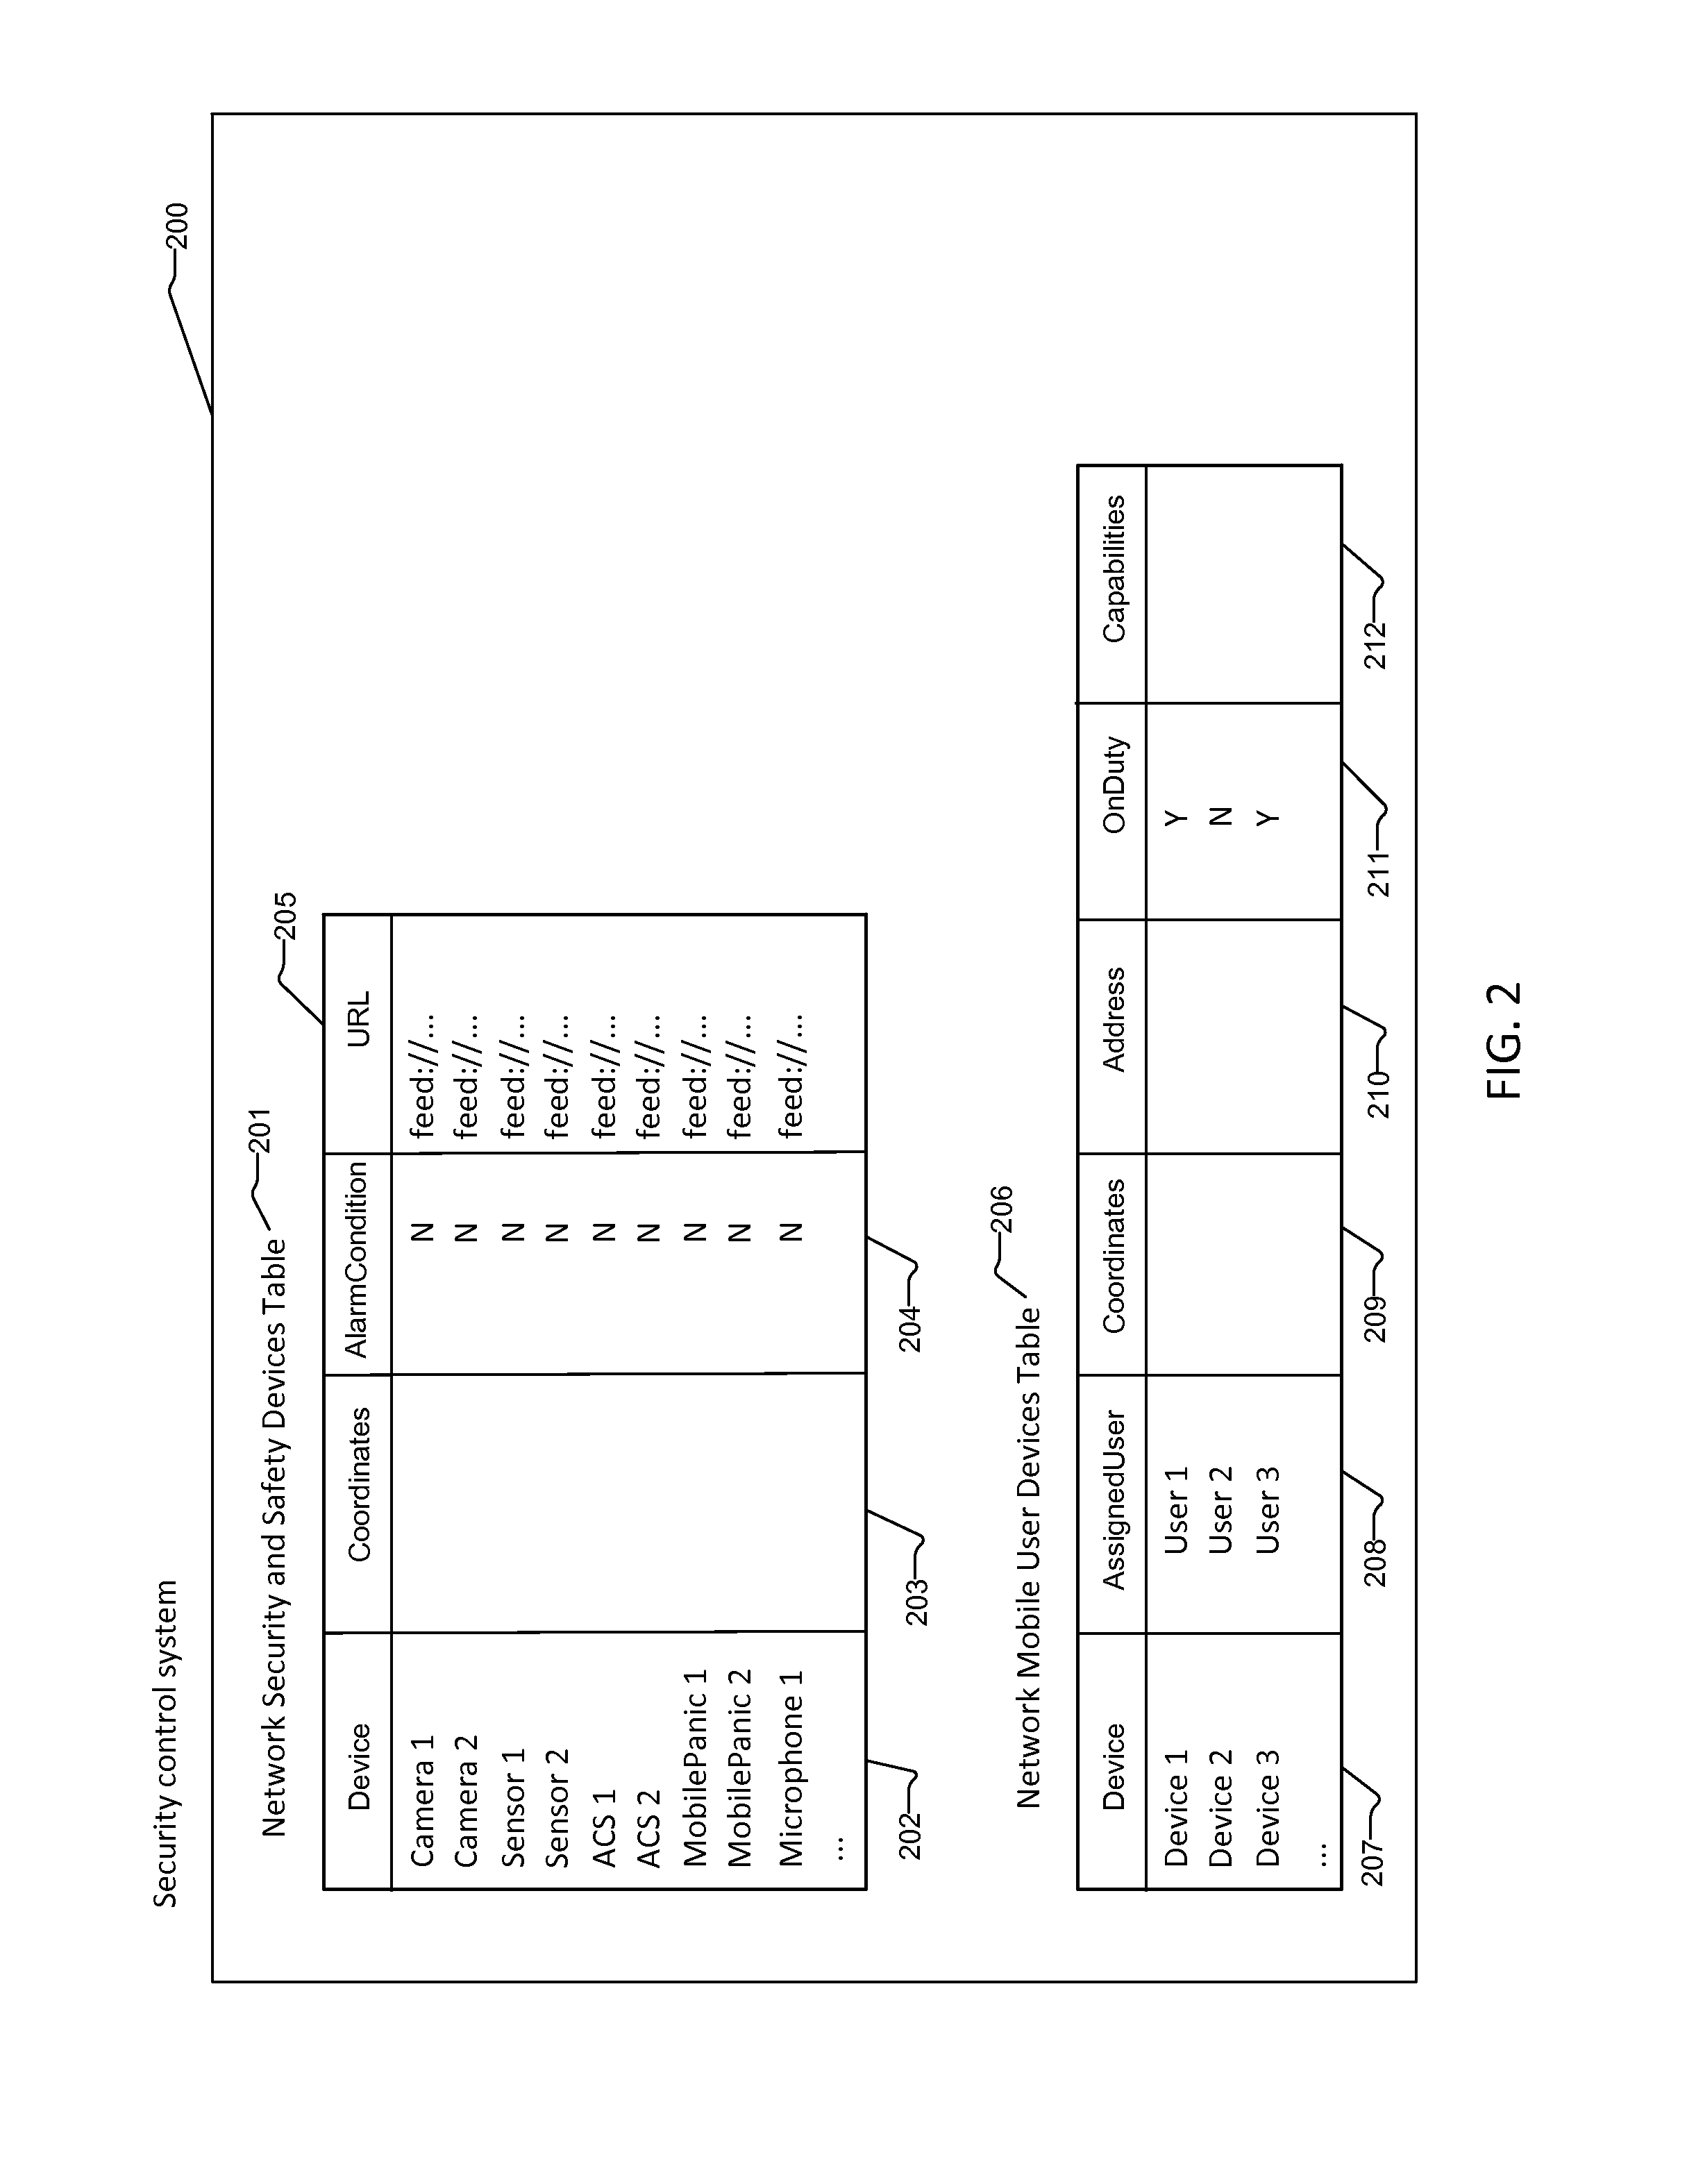 System and Method for Video/Audio and Event Dispatch Using Positioning System